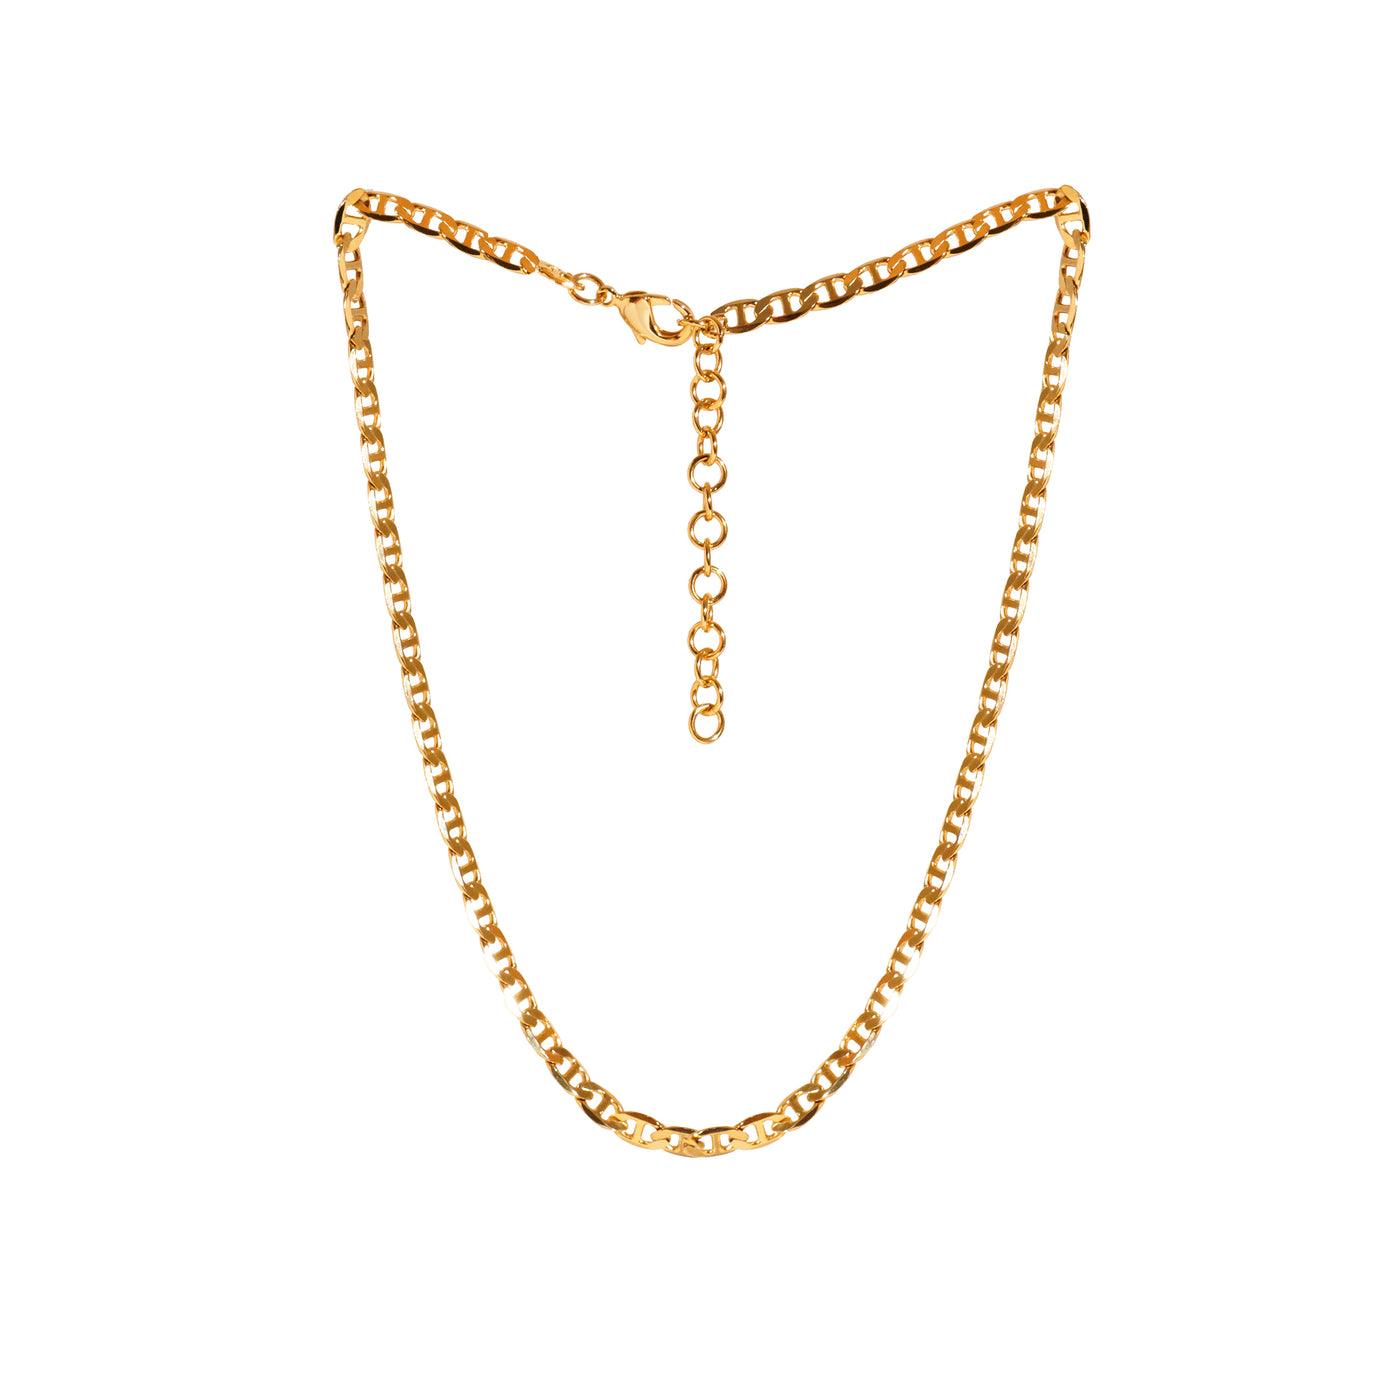 Grande Elouise Chain Necklace, 18KT Gold